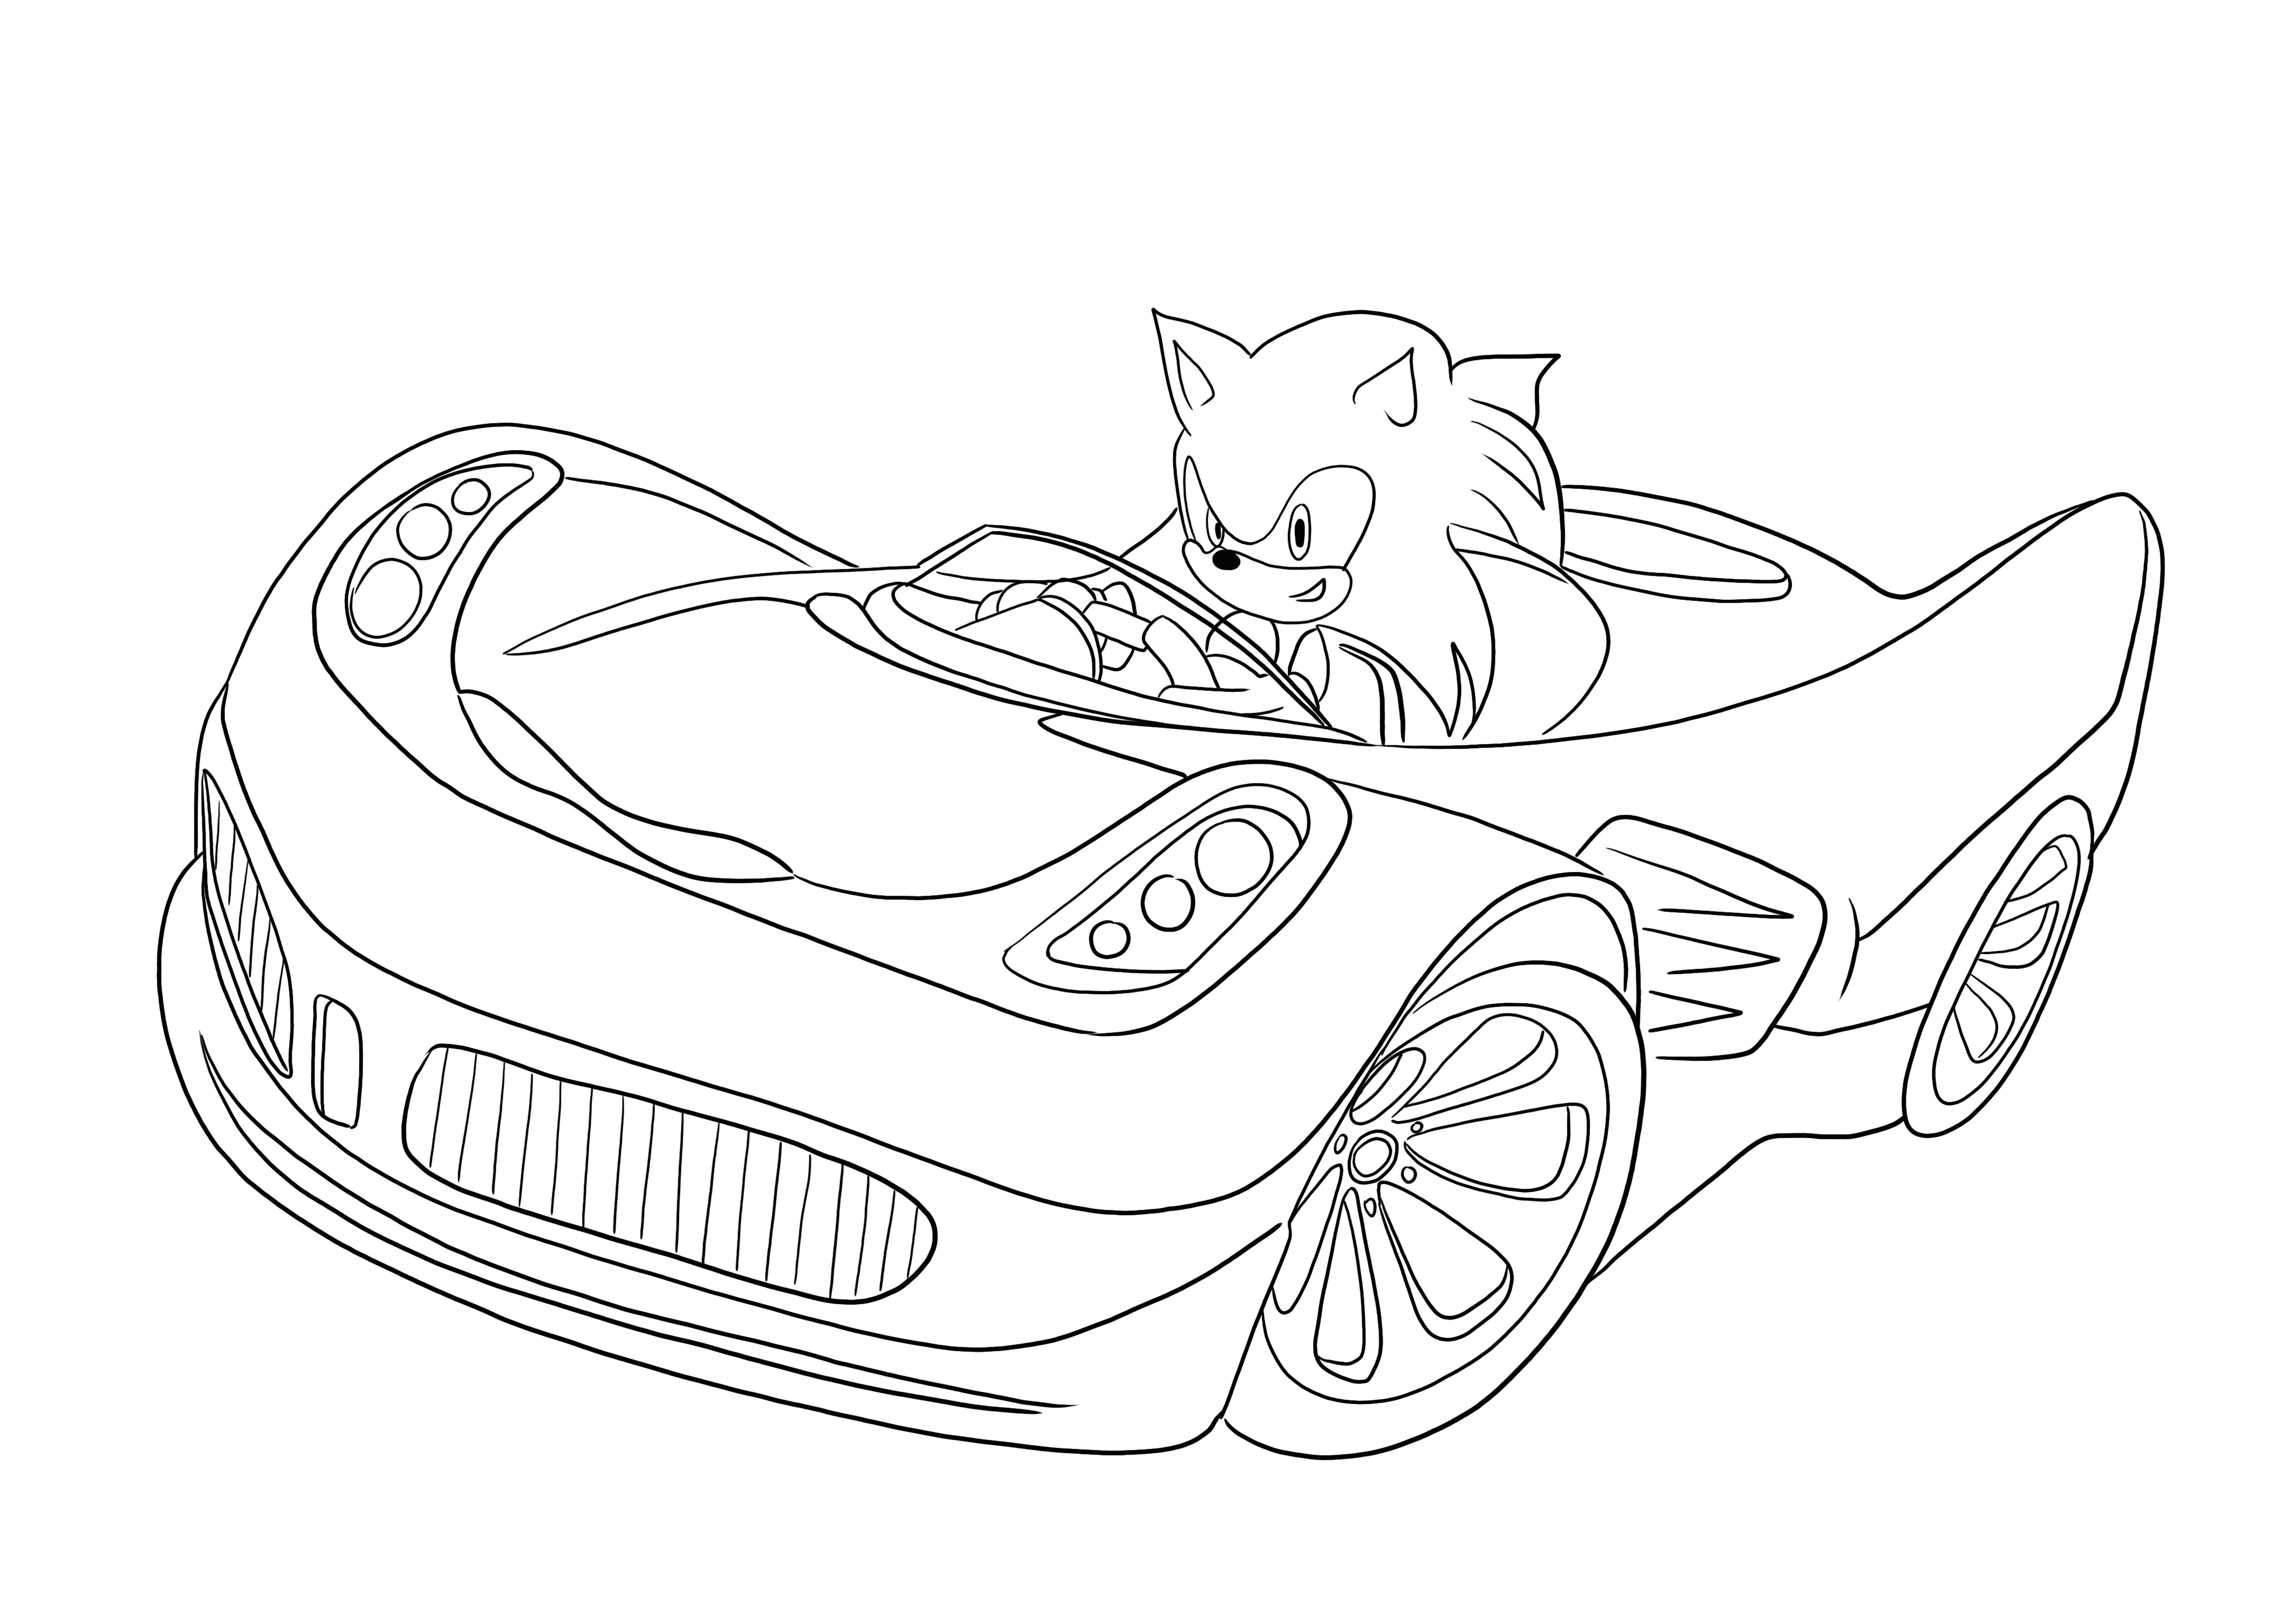 Free coloring page of Sonic riding a car to print and use with kids